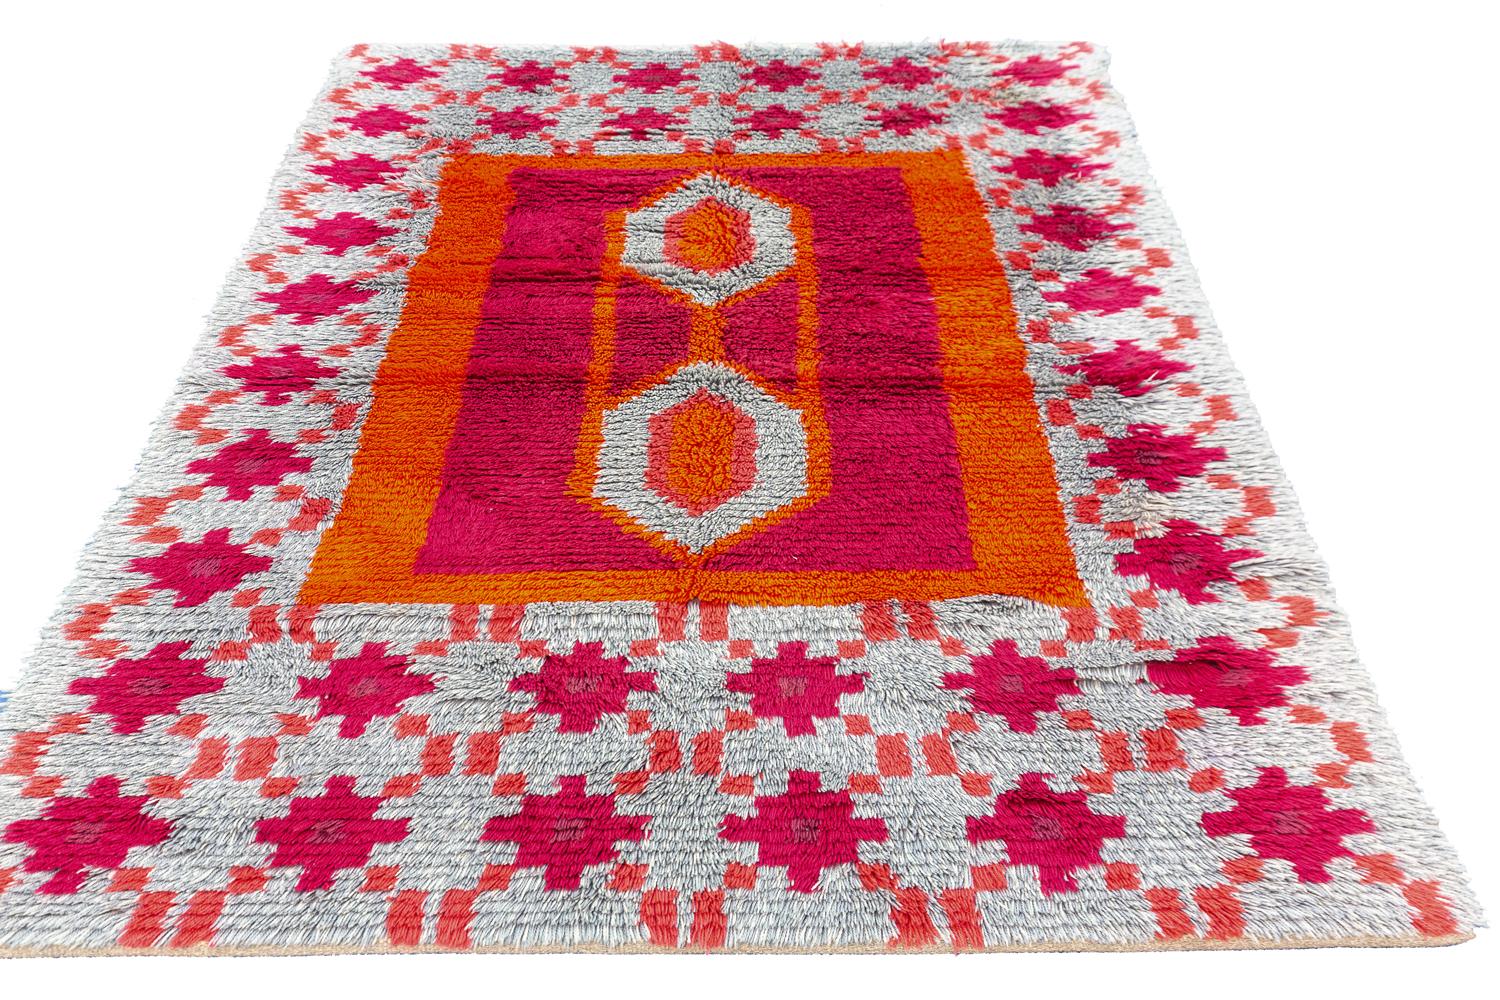 This is a vintage Swedish “Rya” rug woven circa 1950-1970 that measures 200 x 144cm. It has a tribal field design with a center geometric diamond medallion motif enclosed within a red and orange square. The background of the rug is composed of a